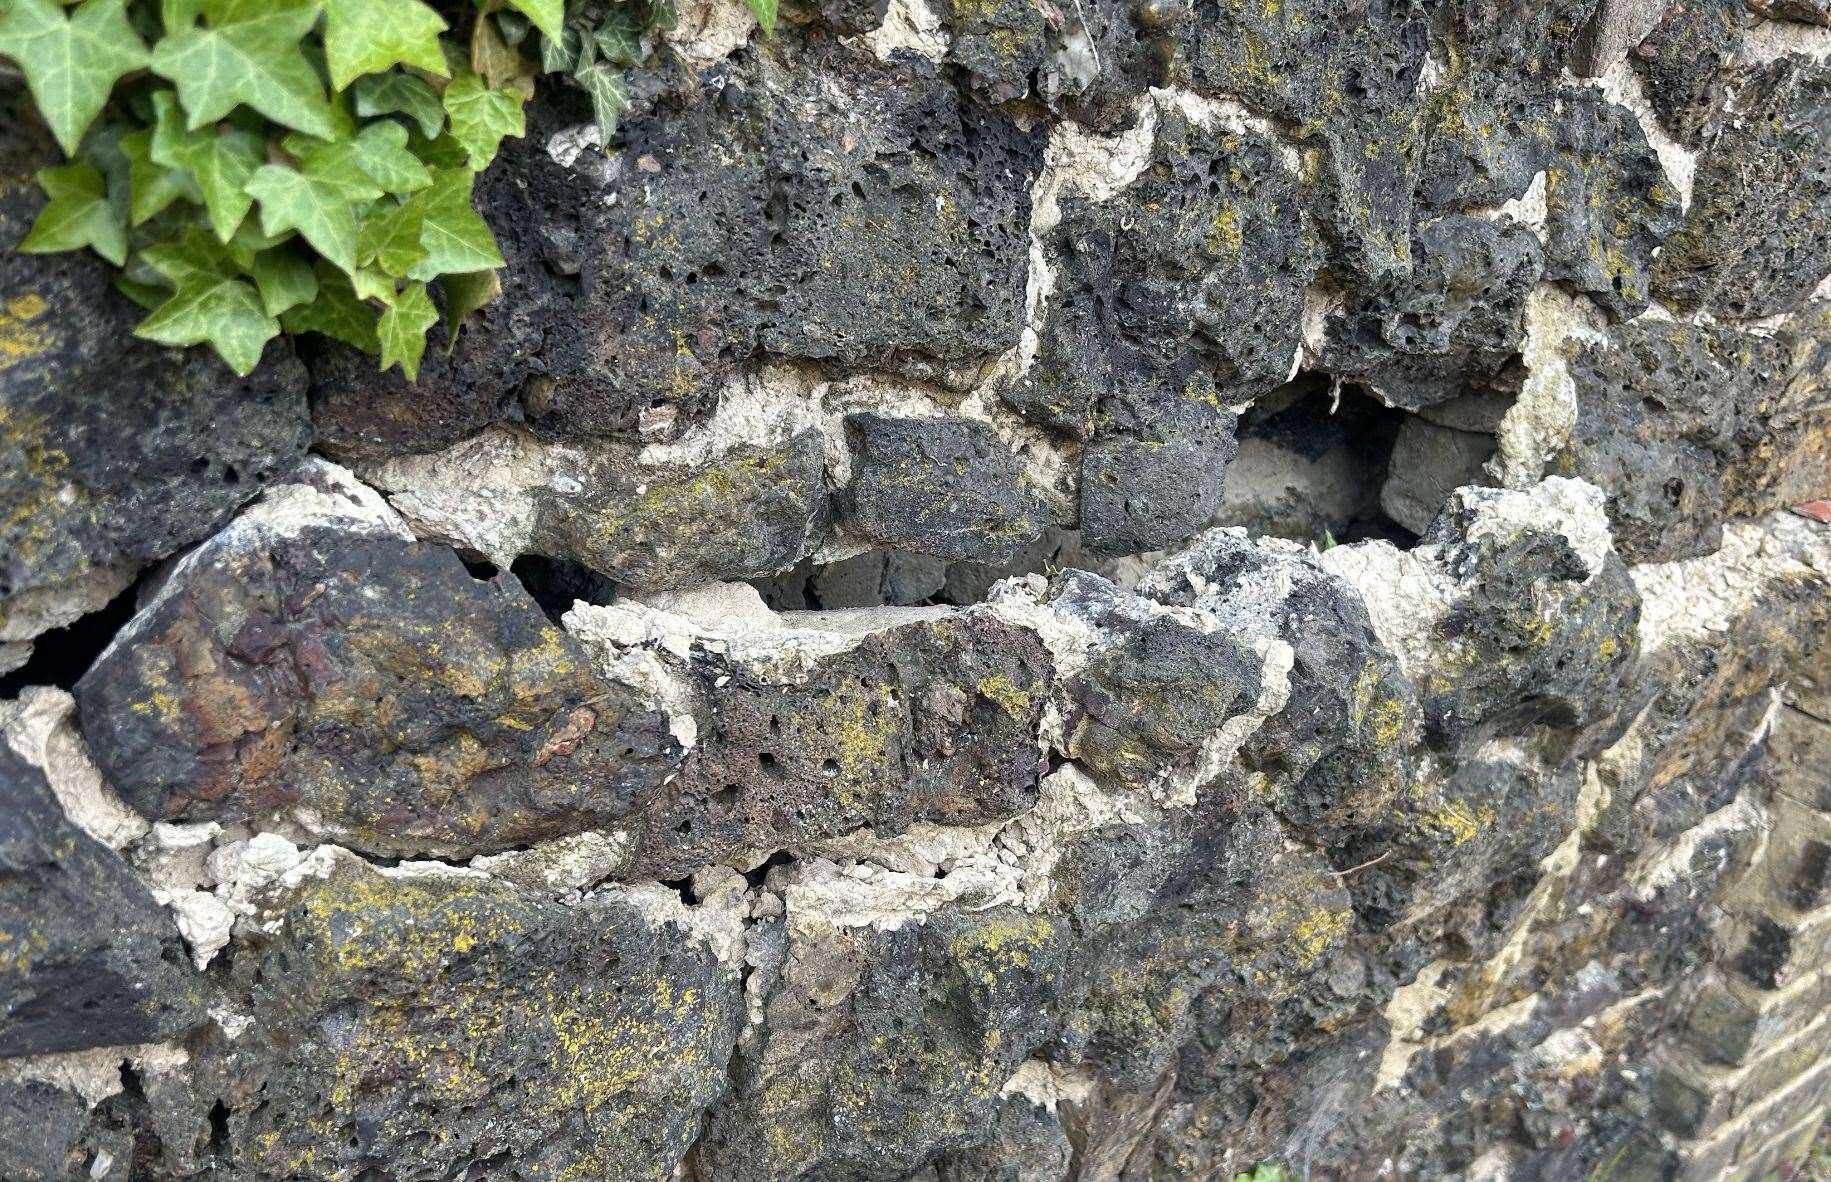 William Dordoy says cracks in the wall appeared after a heavy winter storm